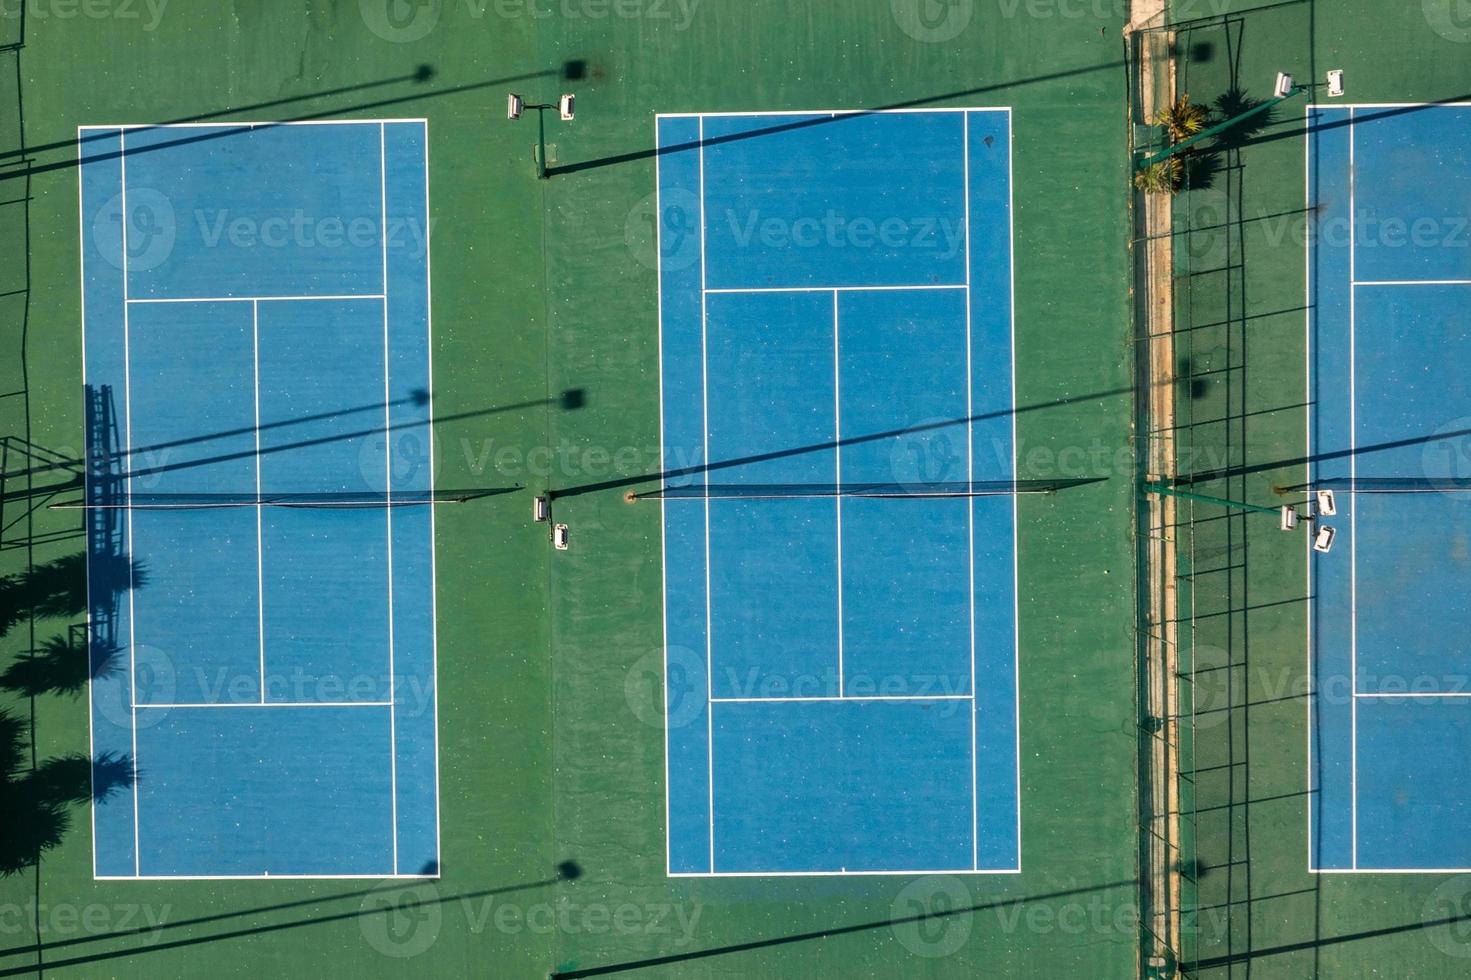 Aerial view of 2 tennis blue tennis courts. photo